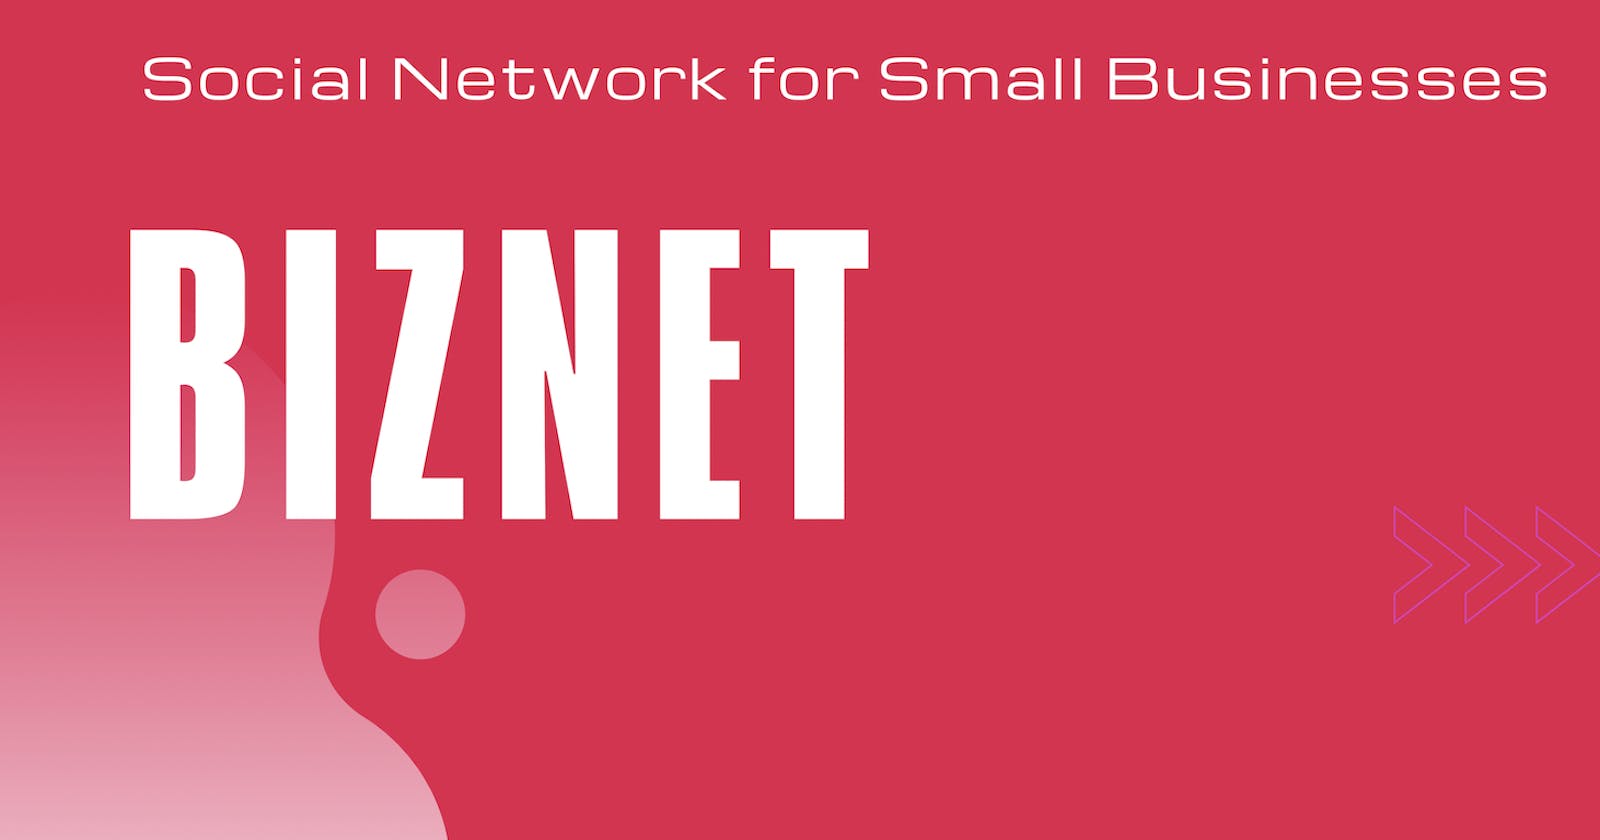 Introducing BIZNET: A Social Network for Small Businesses